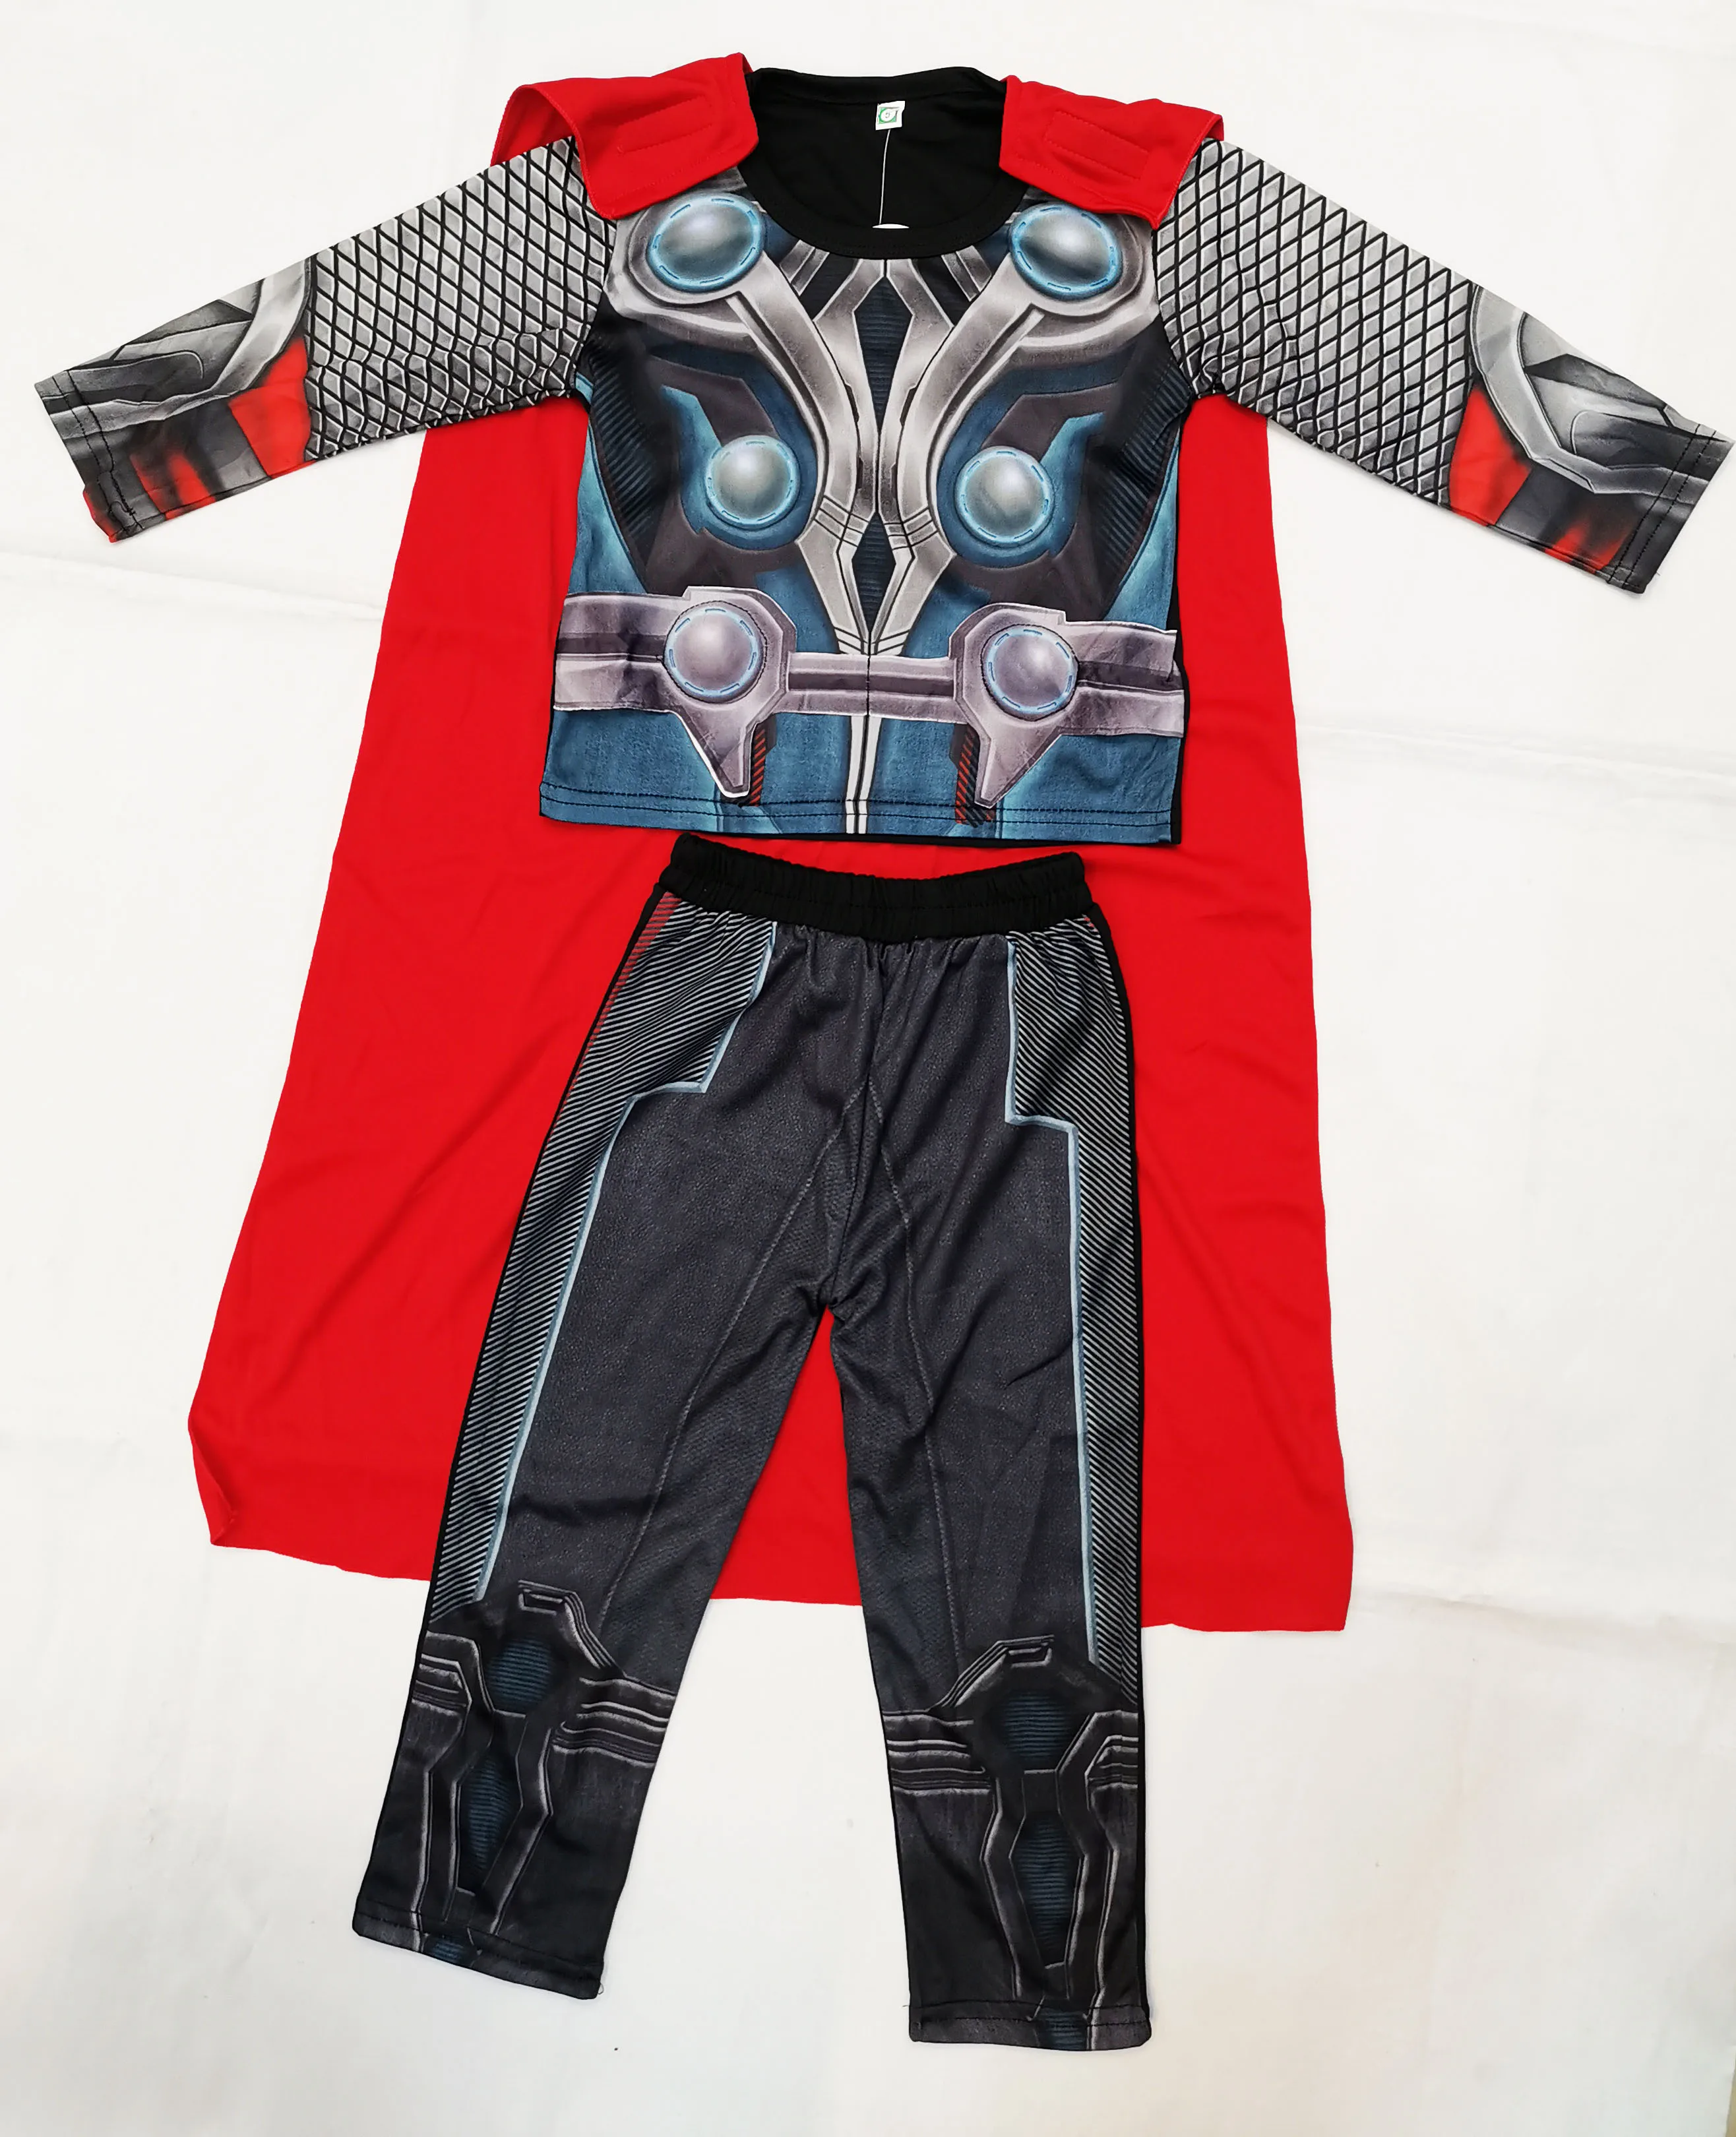 retail-Halloween Digital printing costumes Boy Thor: The Dark World Cosplay clothing Role-playing boy The thor model clothing